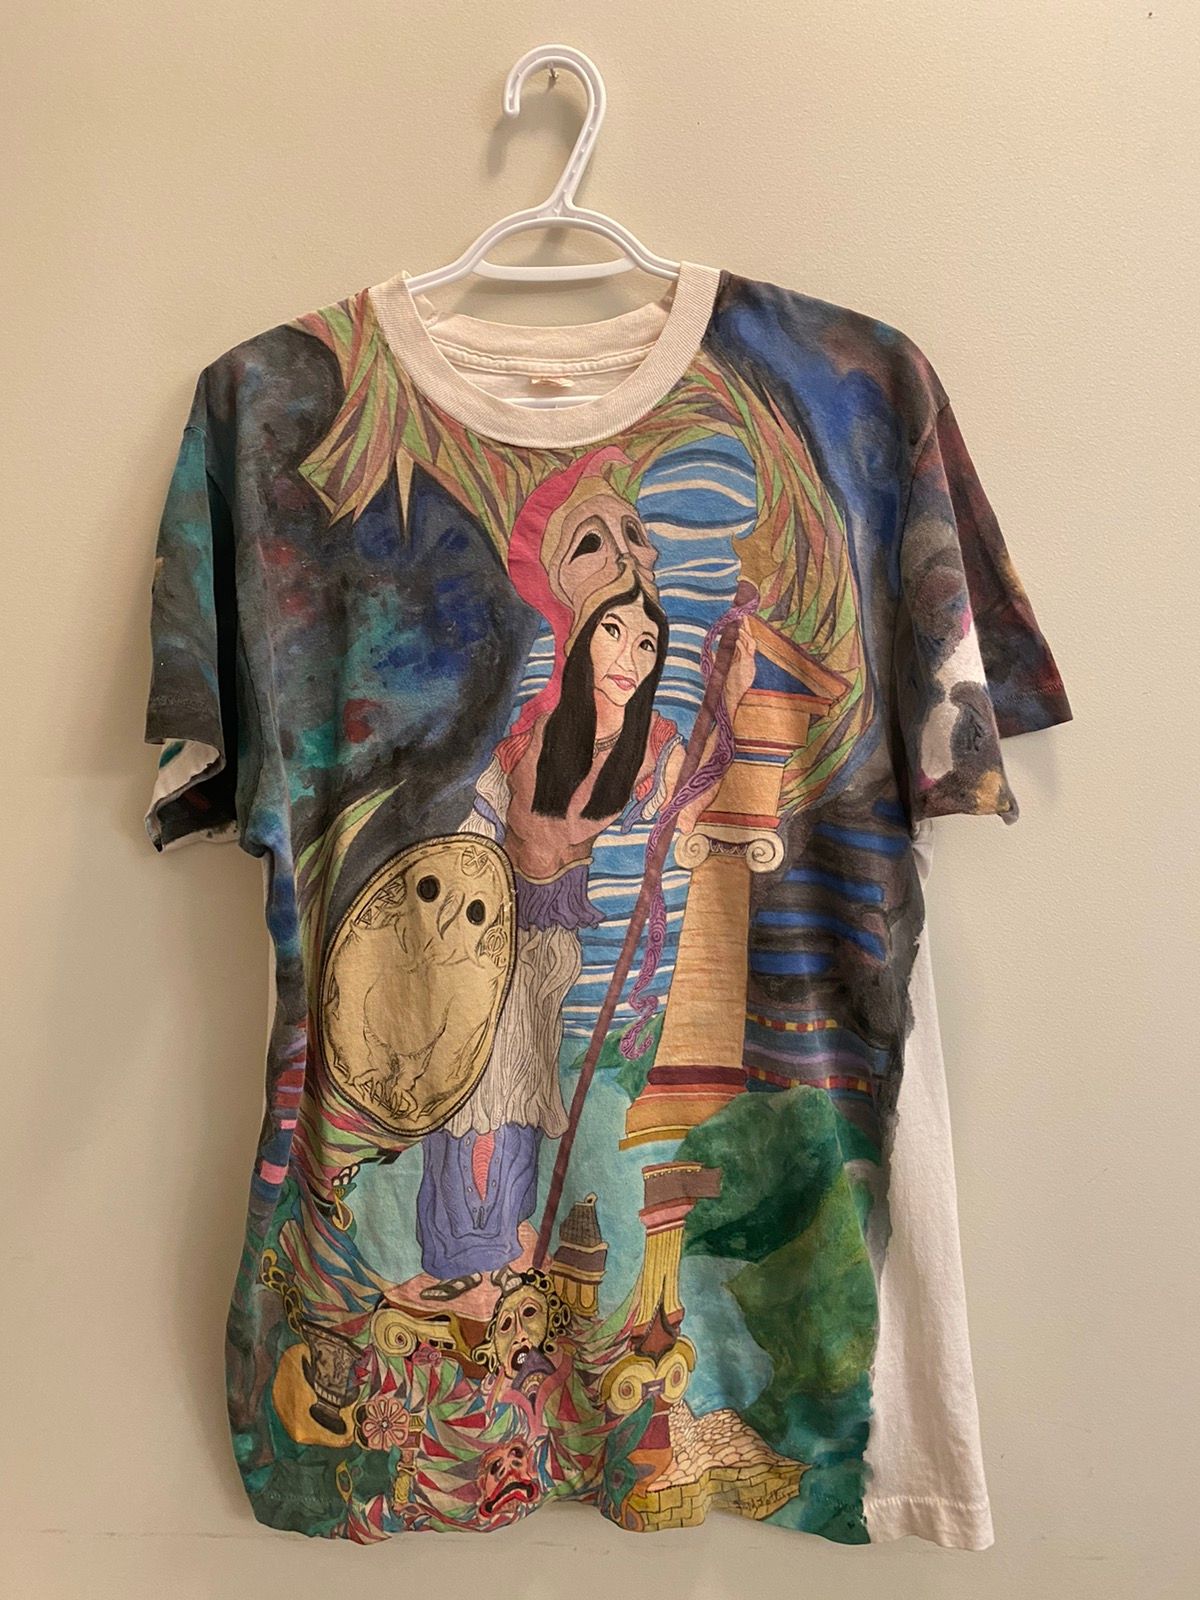 Vintage VINTAGE 90’s ANCIENT EGYPTIAN HAND PAINTED SINGLE STITCH TEE Size US XL / EU 56 / 4 - 1 Preview